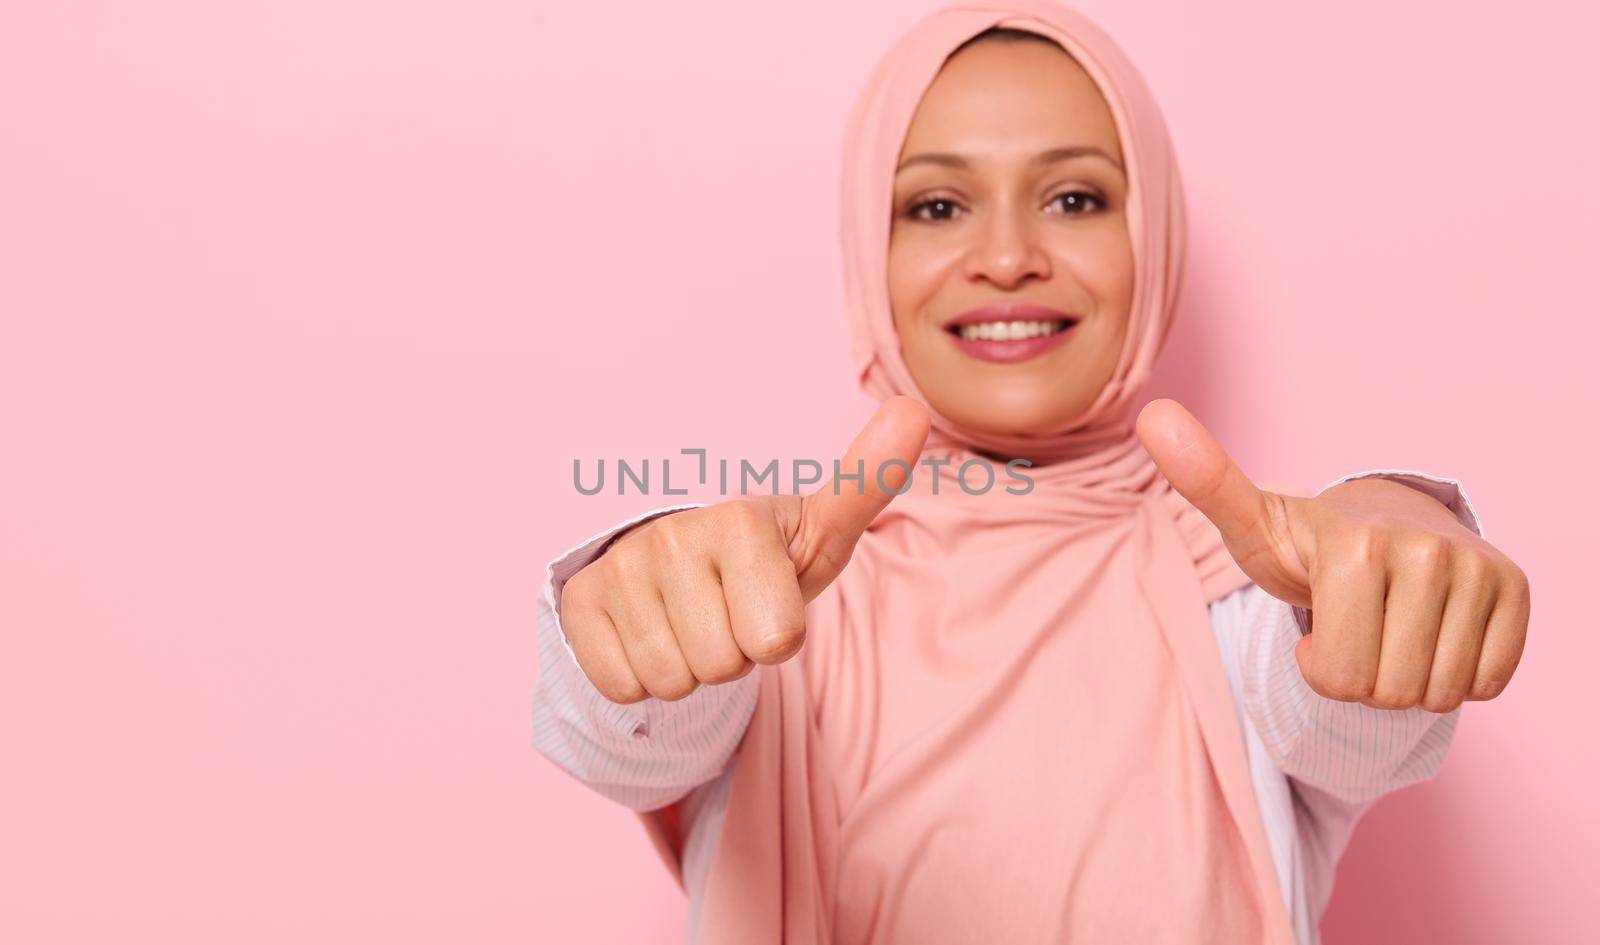 Focus on hands of a blurred smiling with toothy smile Arab Muslim woman in pink hijab, showing thumbs up to the camera, isolated over colored background with space for text by artgf